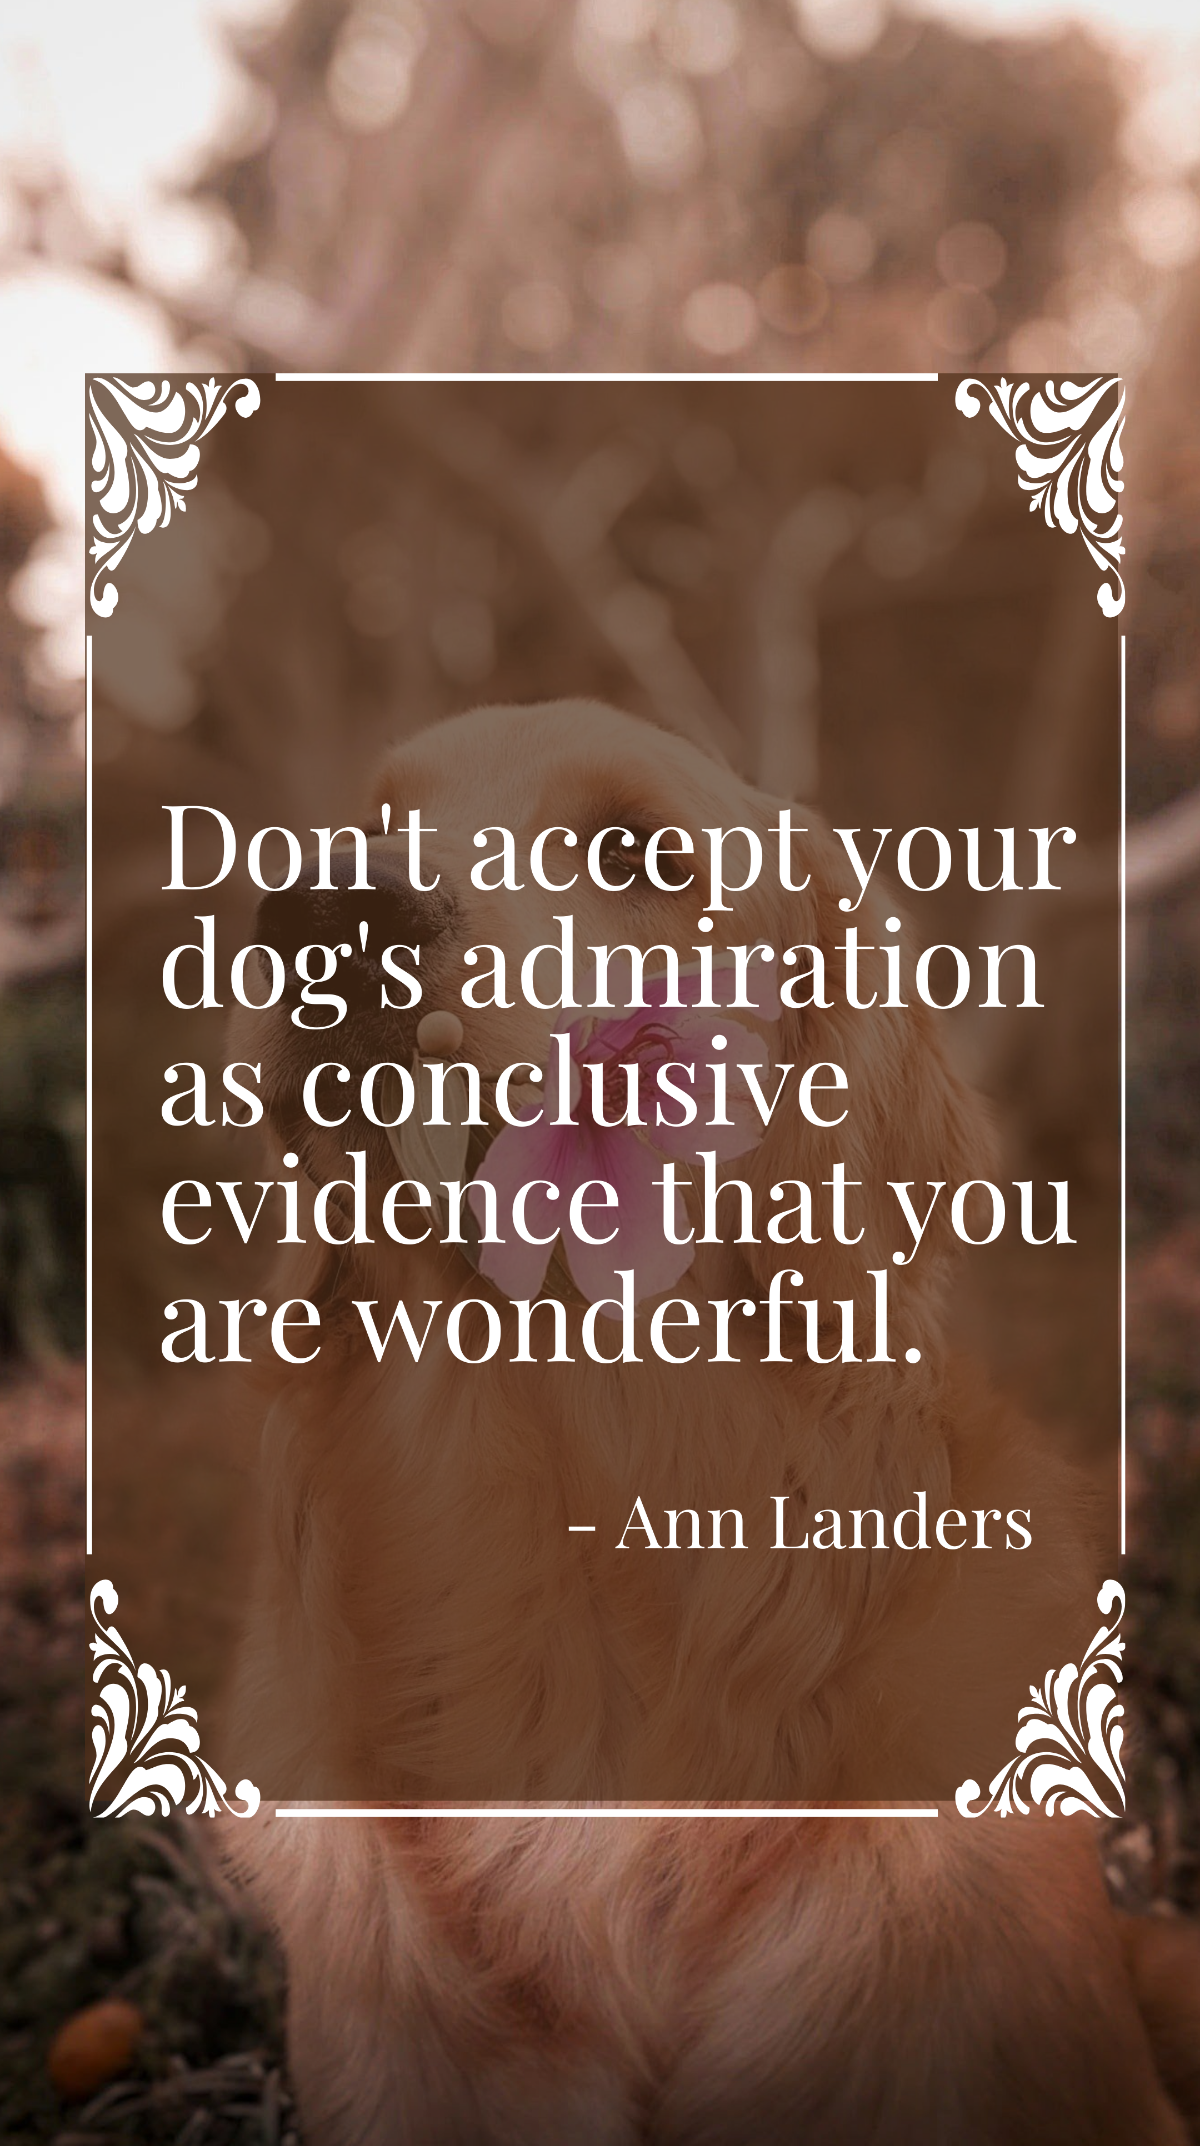 Ann Landers - Don't accept your dog's admiration as conclusive evidence that you are wonderful.